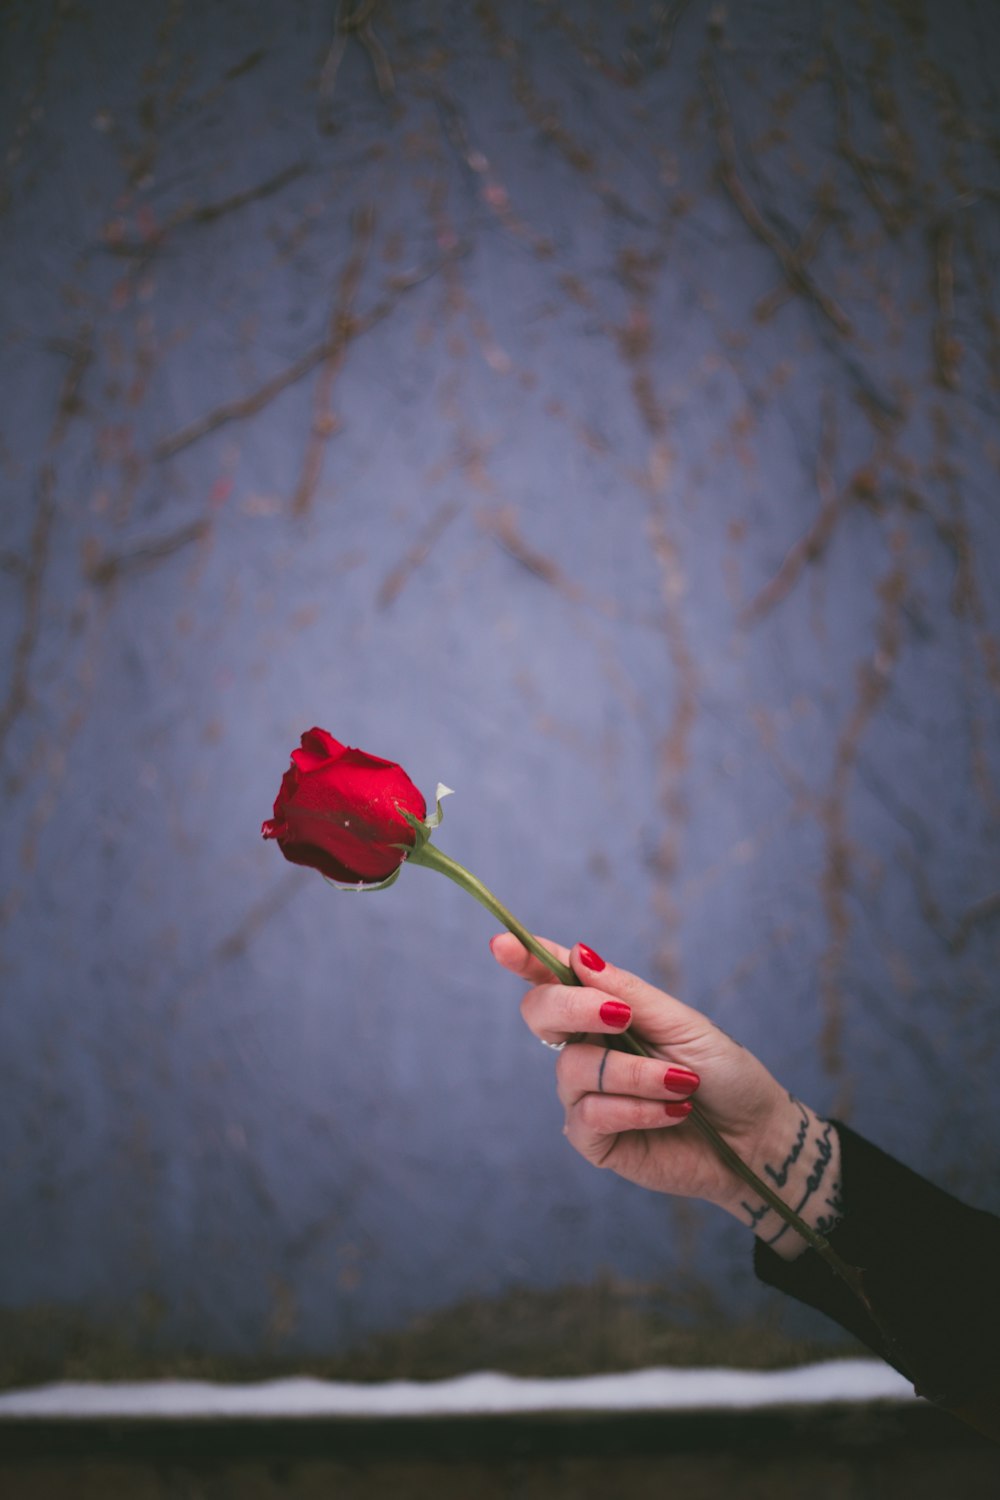 person holding red rose